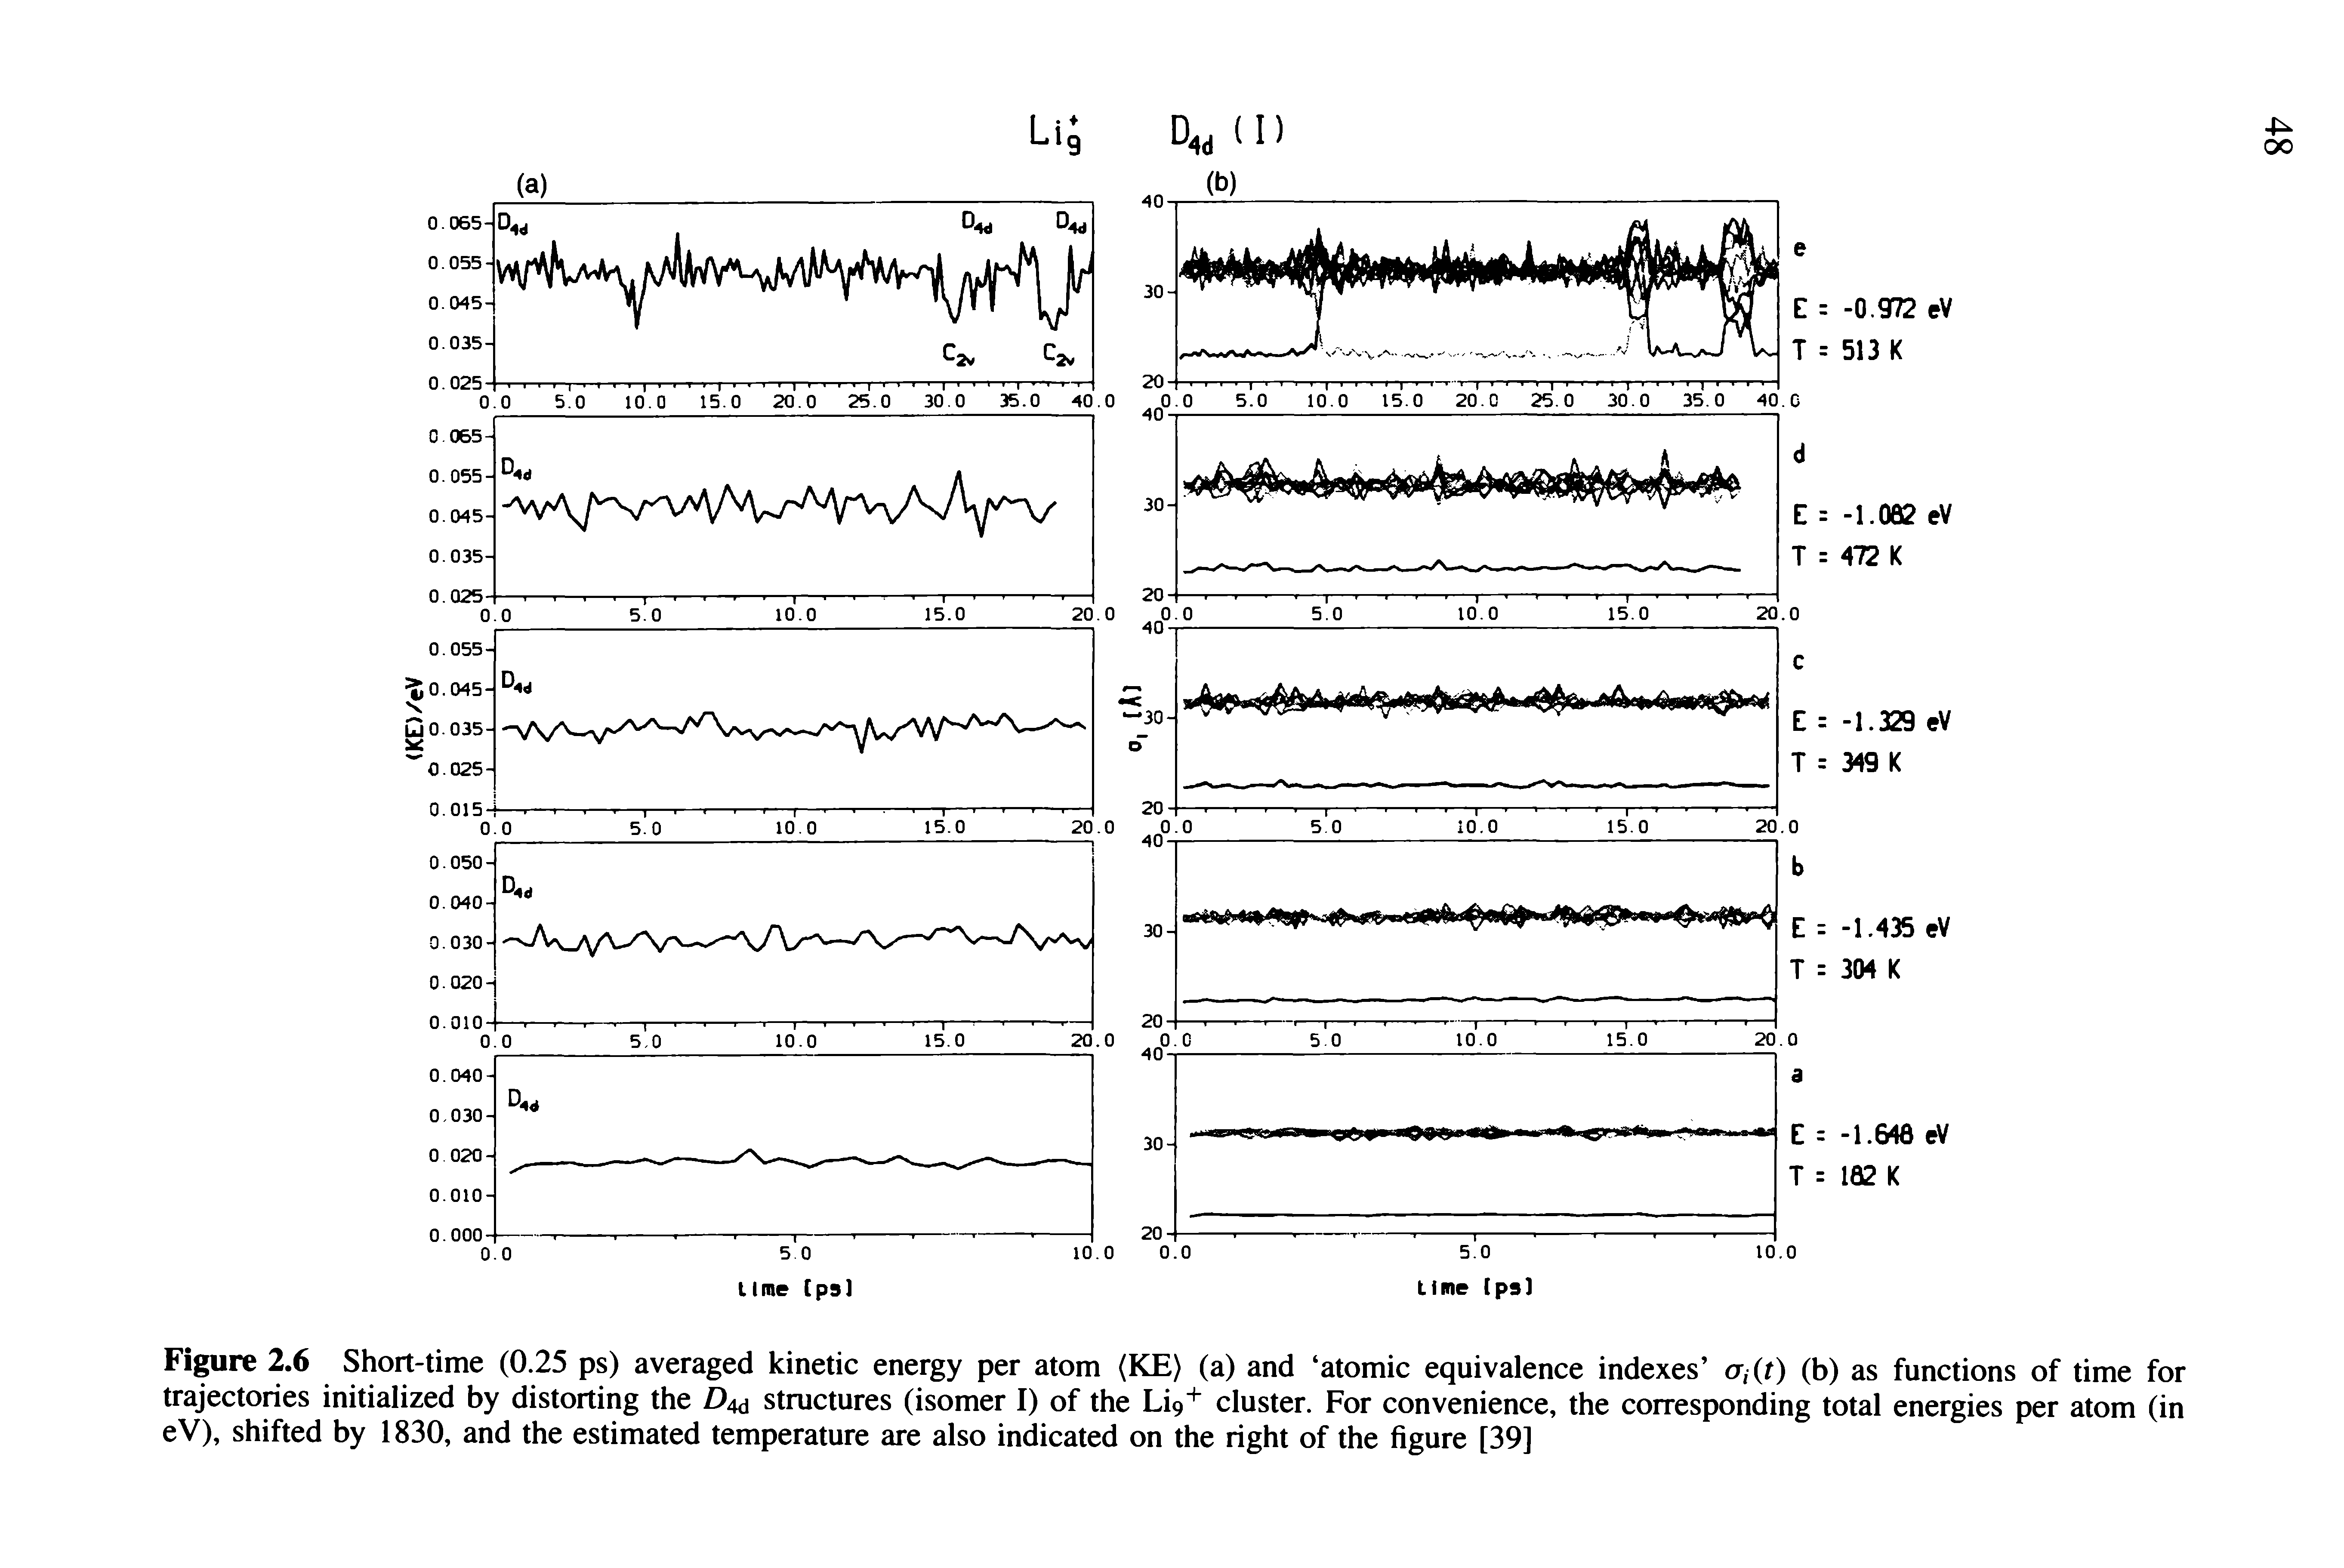 Figure 2.6 Short-time (0.25 ps) averaged kinetic energy per atom (KE) (a) and atomic equivalence indexes a,(r) (b) as functions of time for trajectories initialized by distorting the D4d structures (isomer I) of the cluster. For convenience, the corresponding total energies per atom (in...